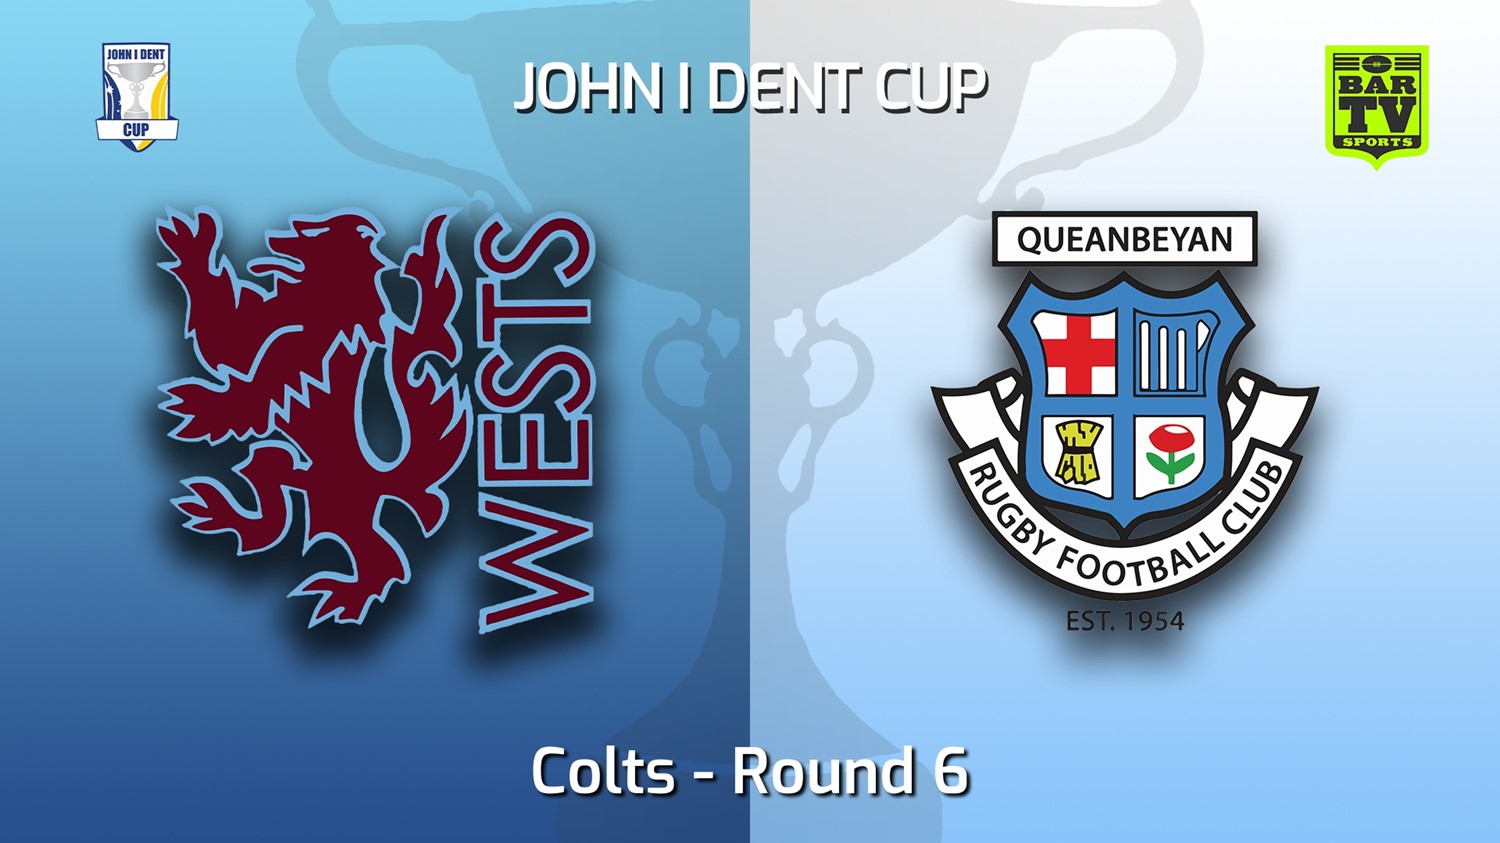 220528-John I Dent (ACT) Round 6 - Colts - Wests Lions v Queanbeyan Whites Slate Image